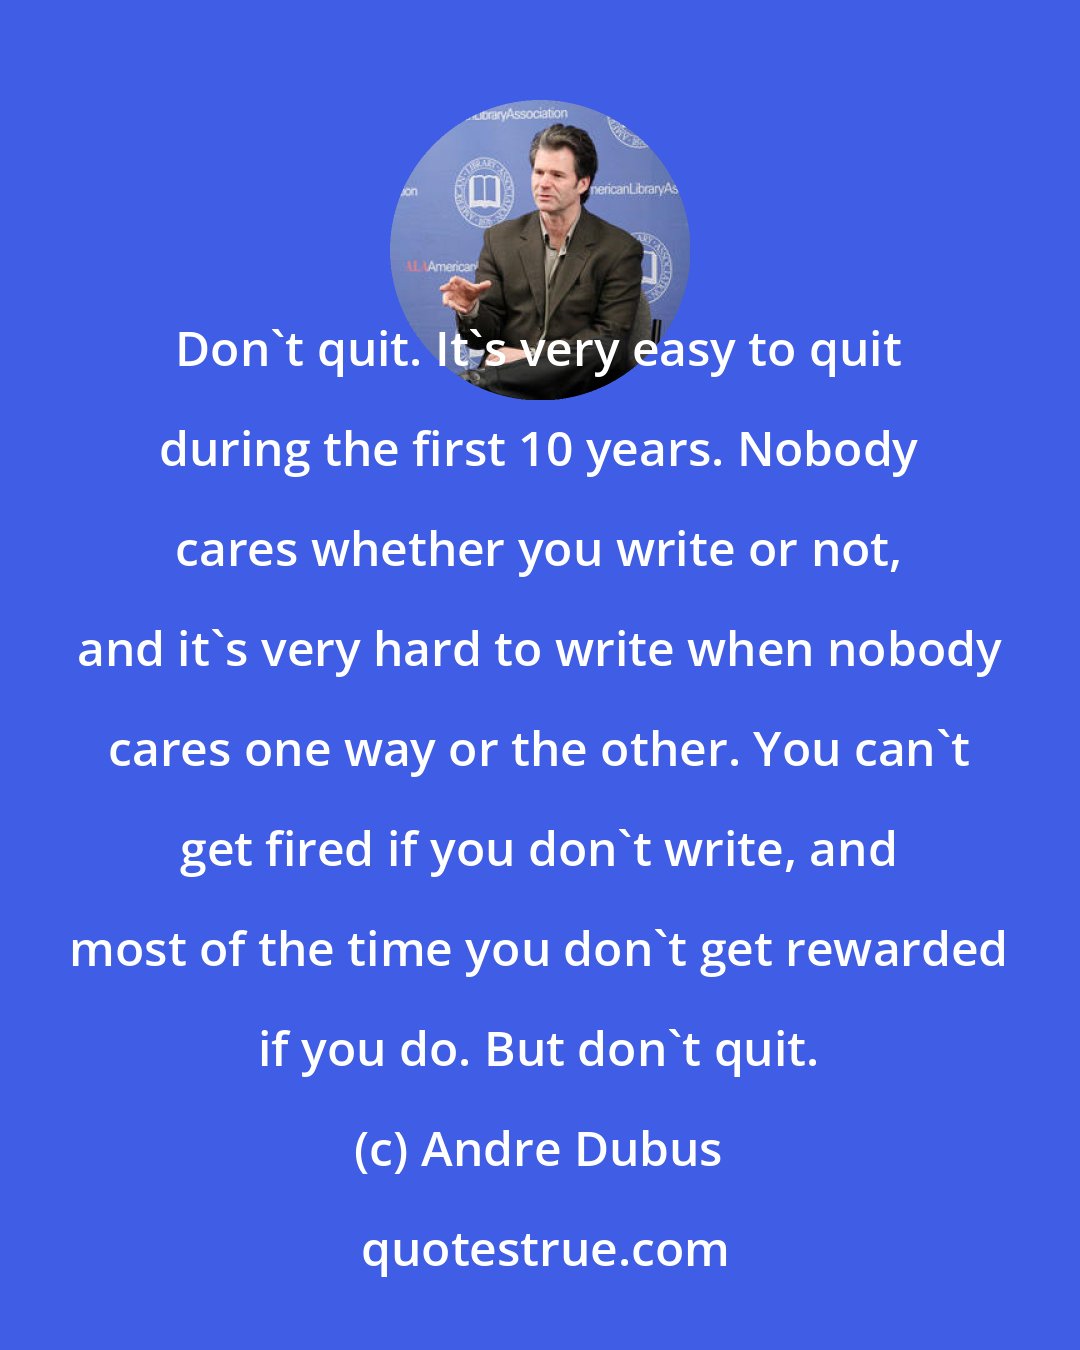 Andre Dubus: Don't quit. It's very easy to quit during the first 10 years. Nobody cares whether you write or not, and it's very hard to write when nobody cares one way or the other. You can't get fired if you don't write, and most of the time you don't get rewarded if you do. But don't quit.